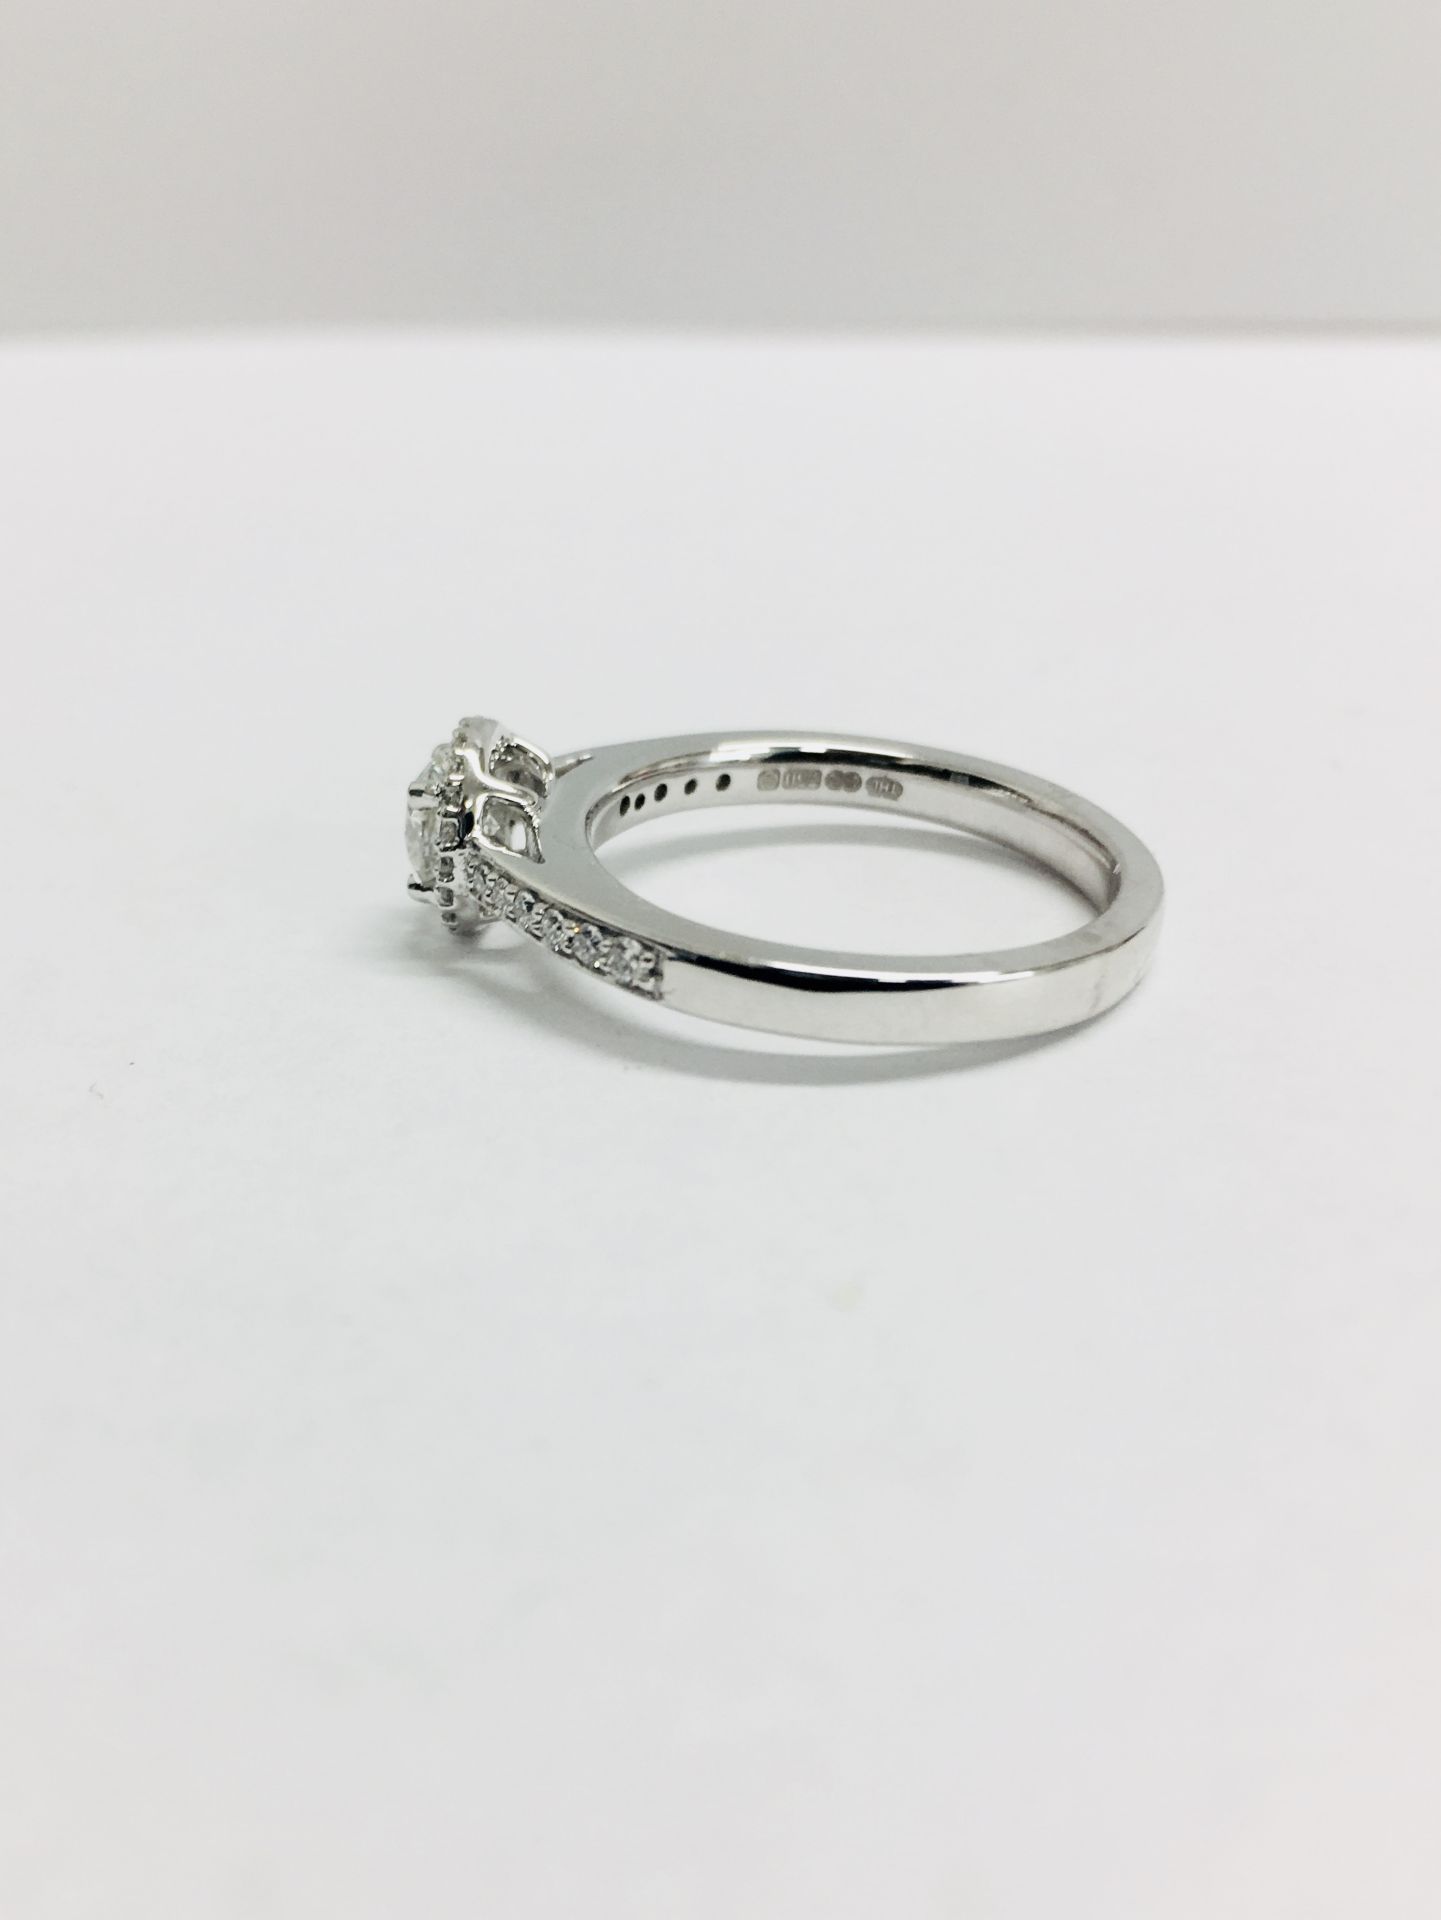 18ct white gold Halo style solitaire ring,0.50ct natural diamond D colour,vs clarity,0.28ct h Colour - Image 2 of 7